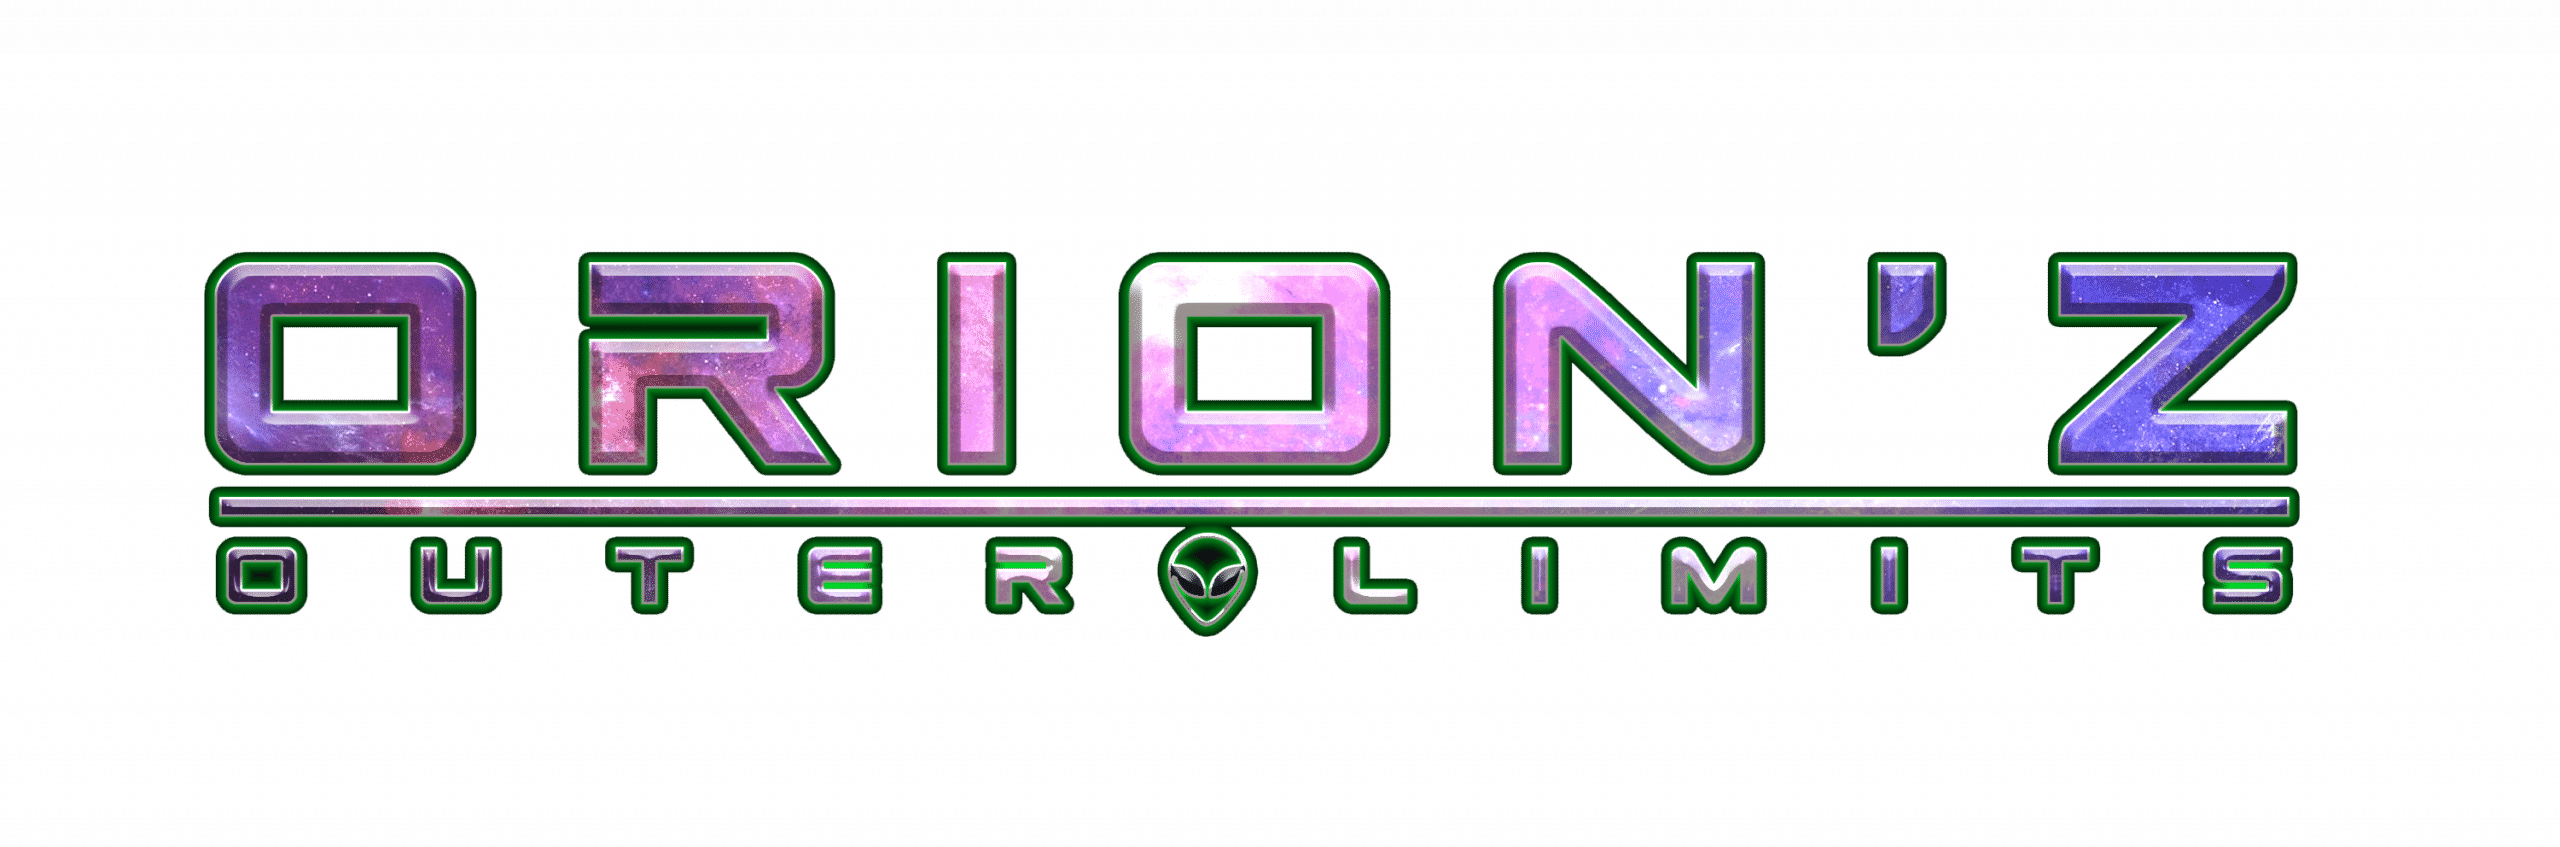 orionz outer limits logo design new